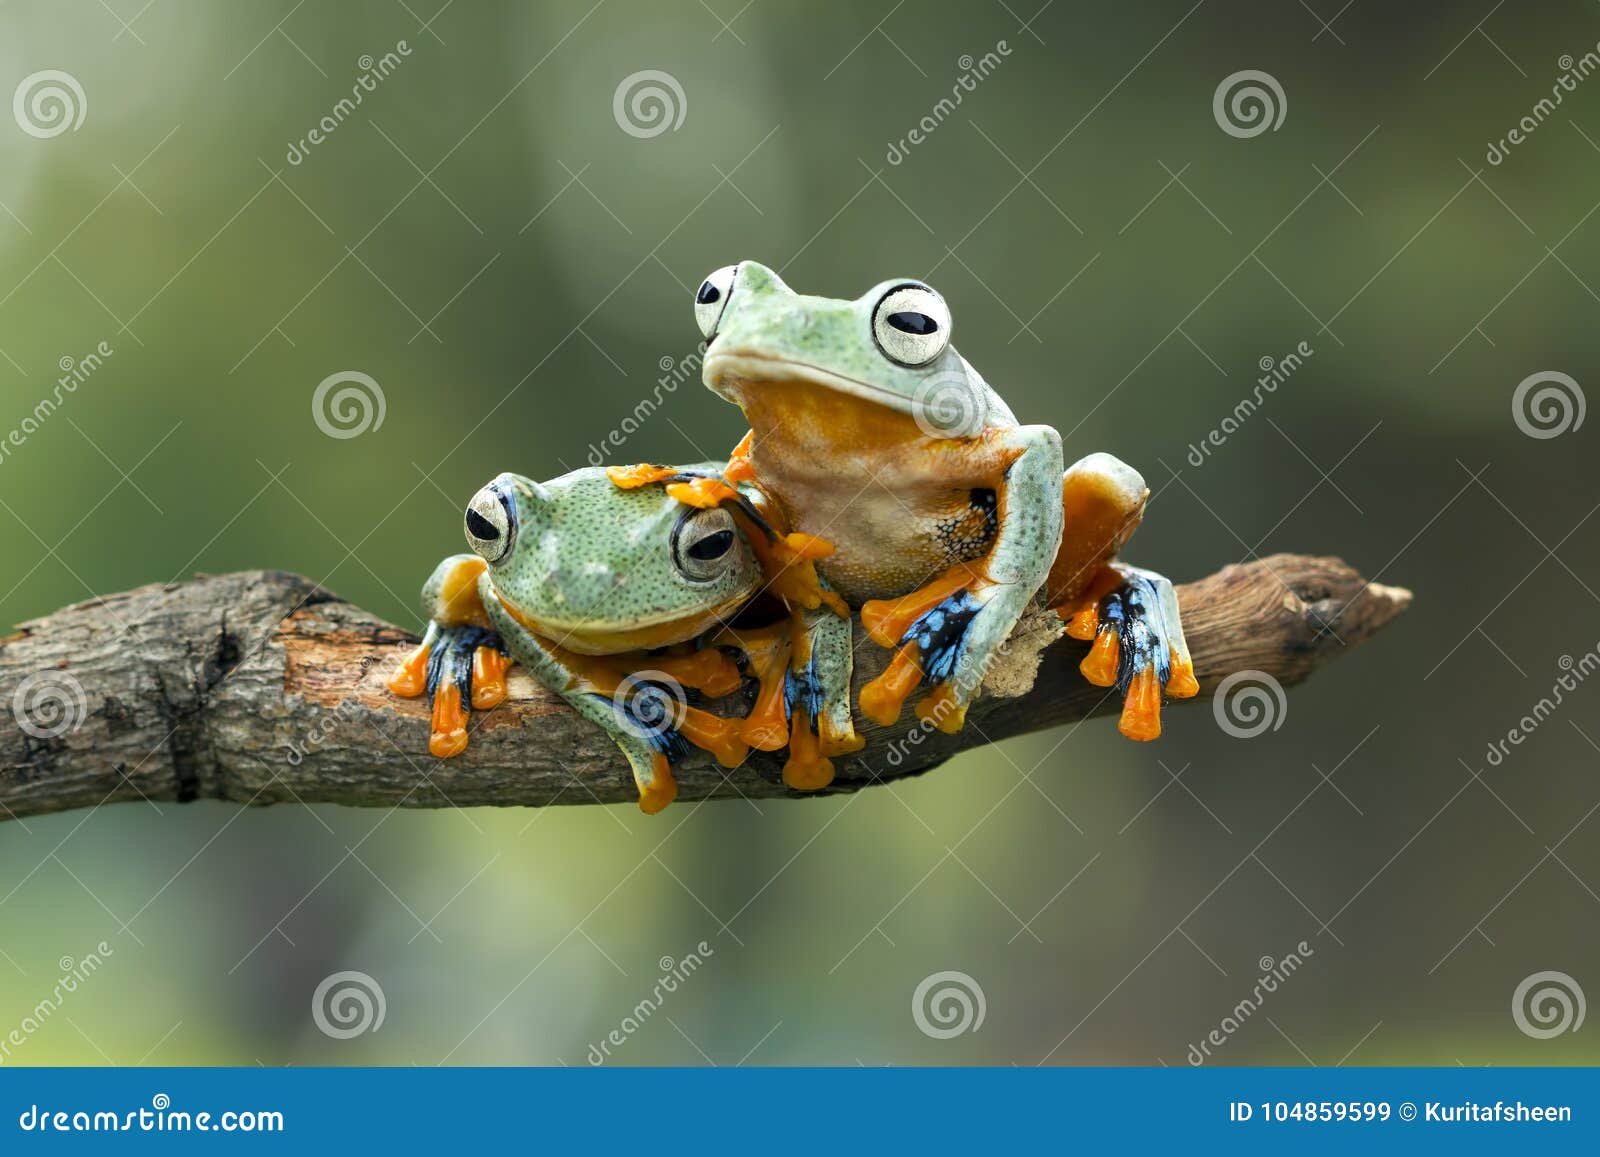 tree frog, flying frog on the branch